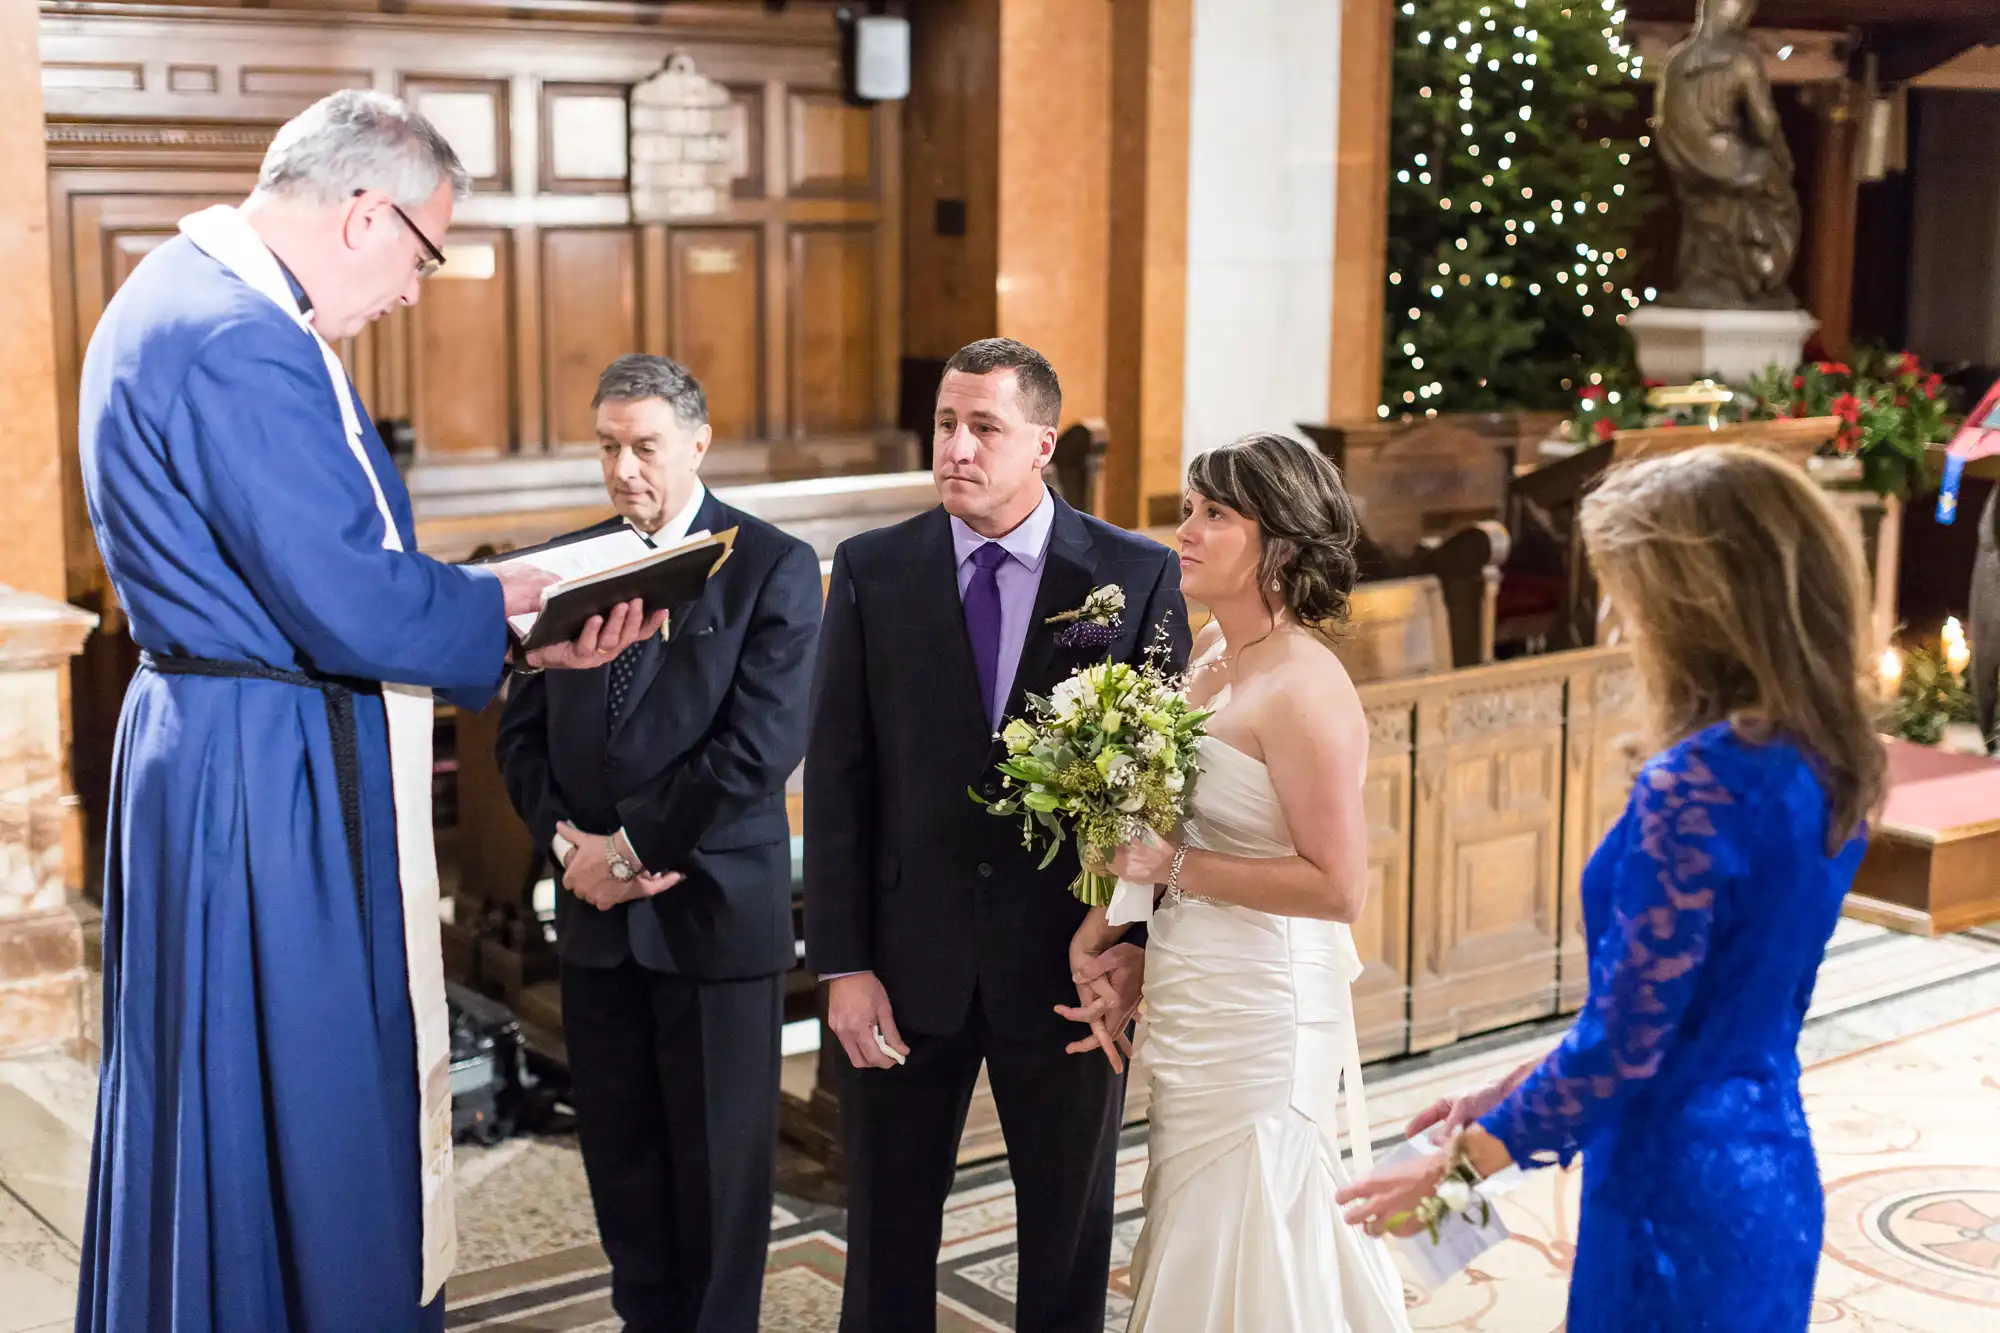 A wedding ceremony inside a church with a priest reading to a bride and groom, and two guests watching.